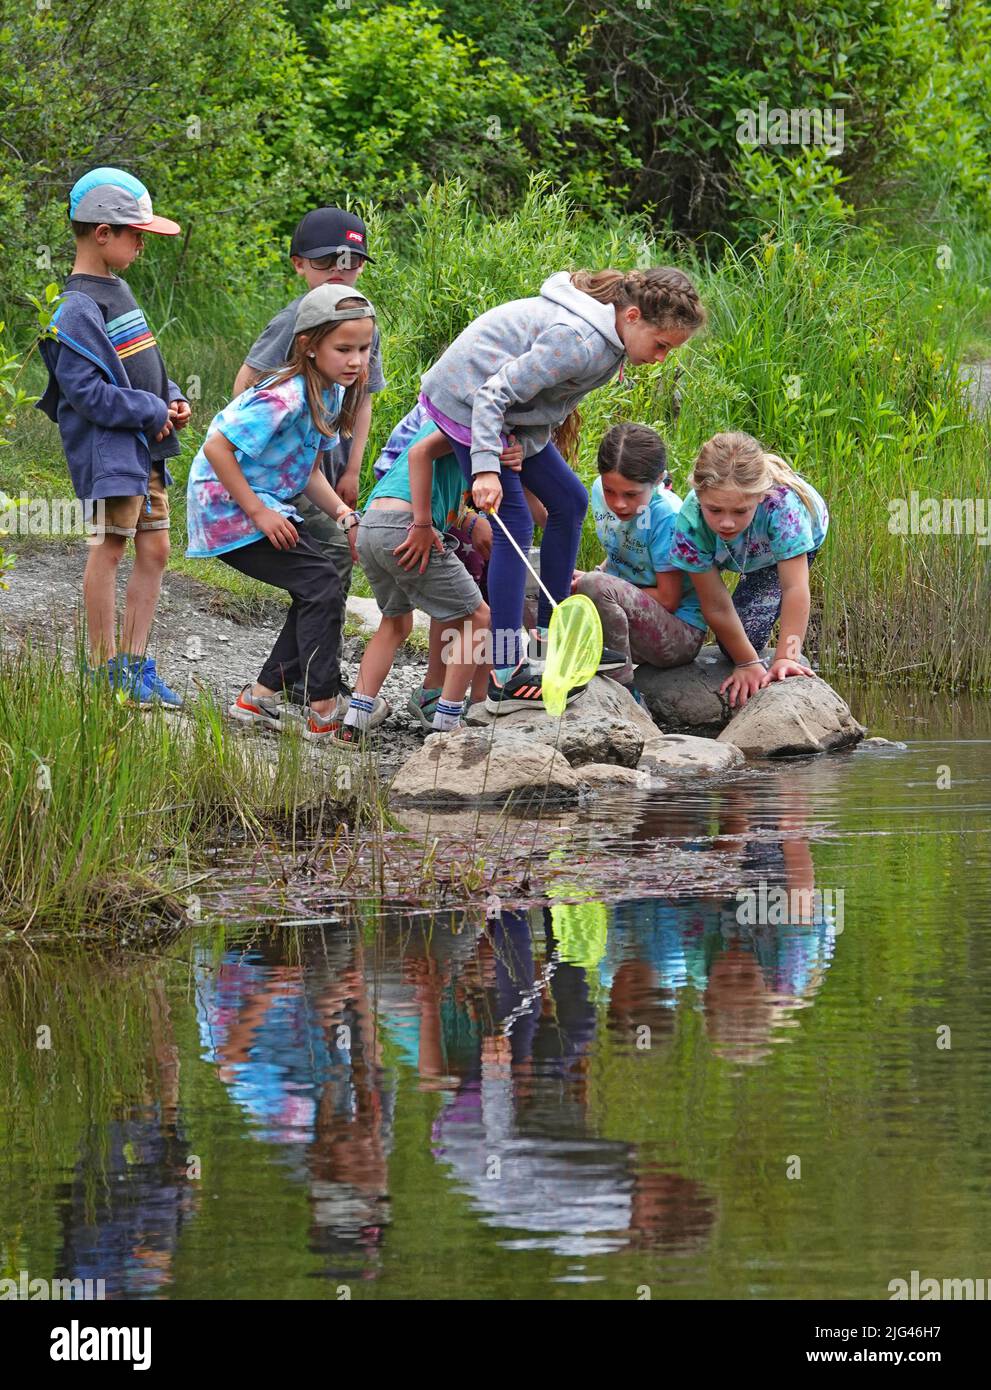 A group of children playing on the edge of a small pond in a city park in Bend, Oregon. Stock Photo